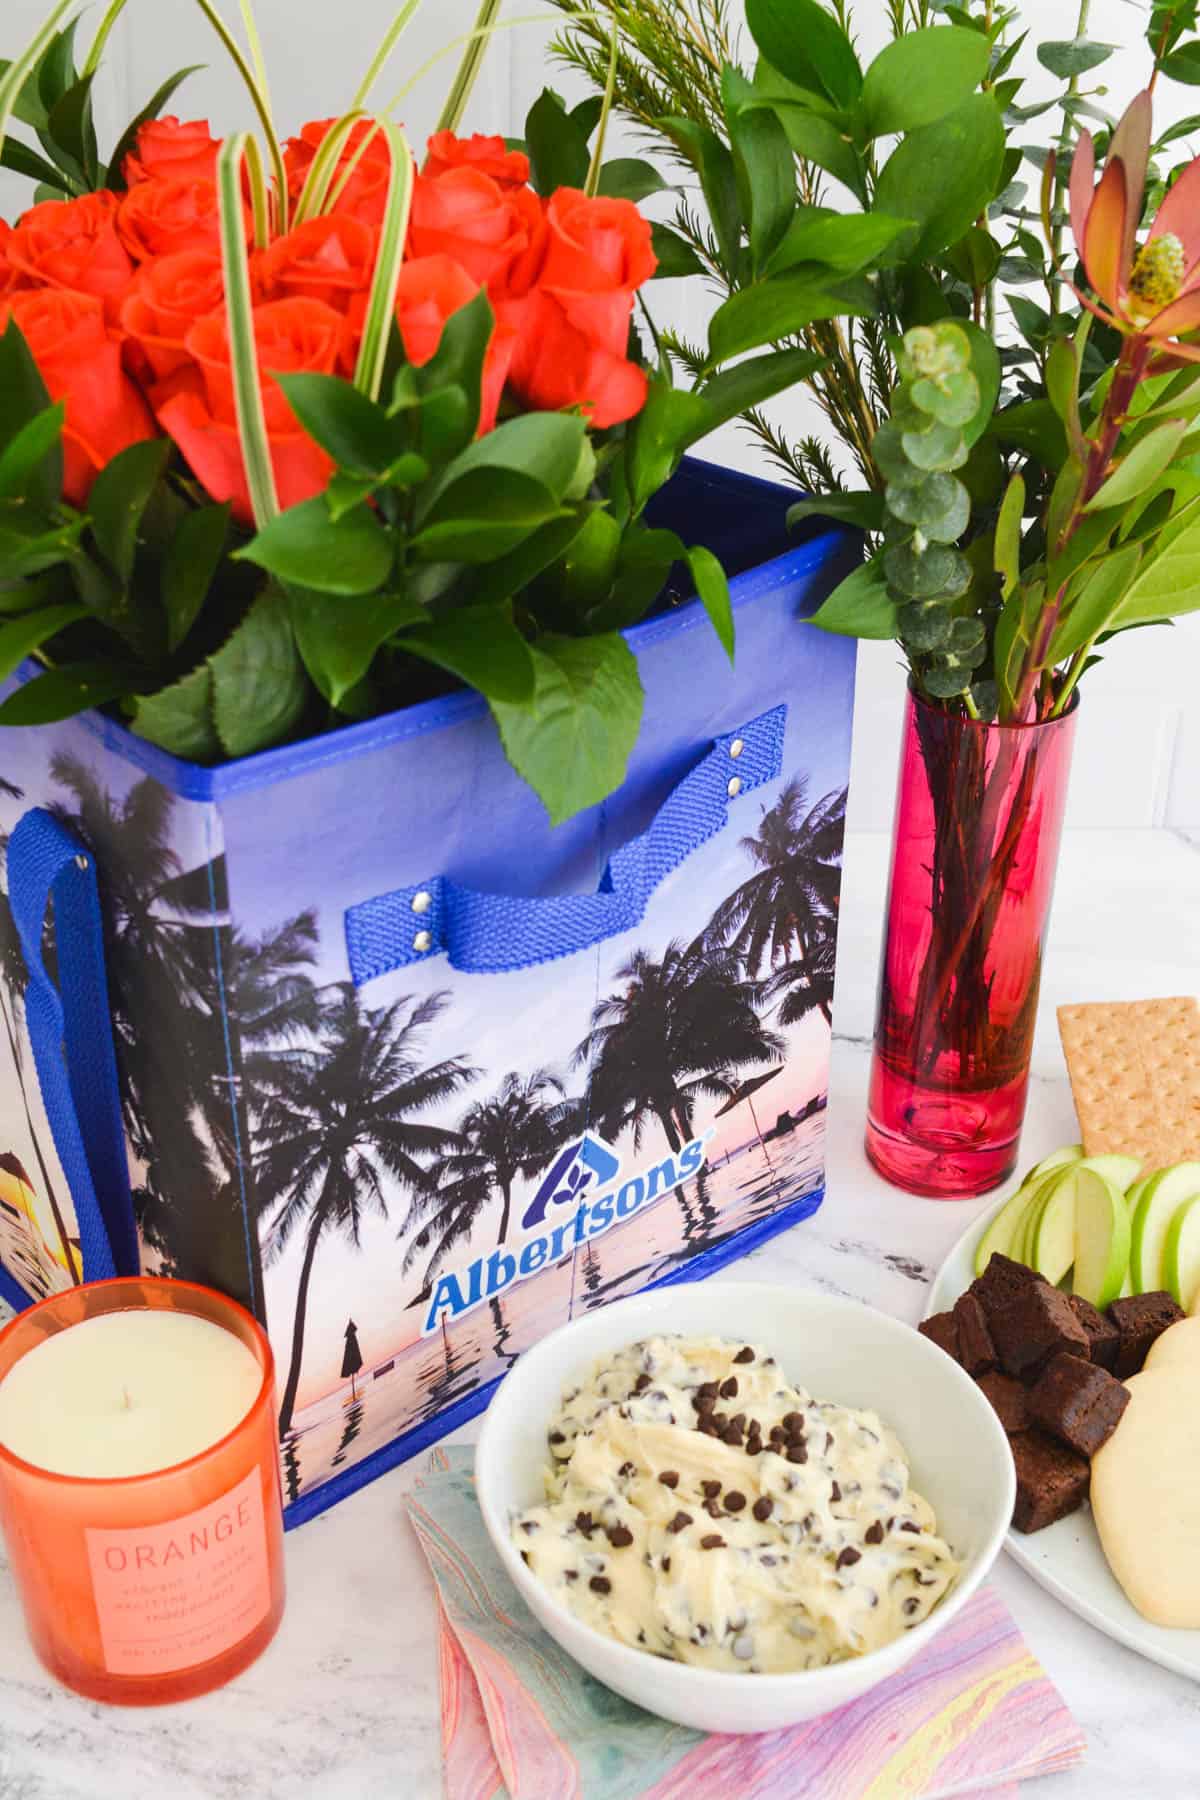 An Albertsons reusable bag next to Debi Lily candles and vases and a dessert dip.